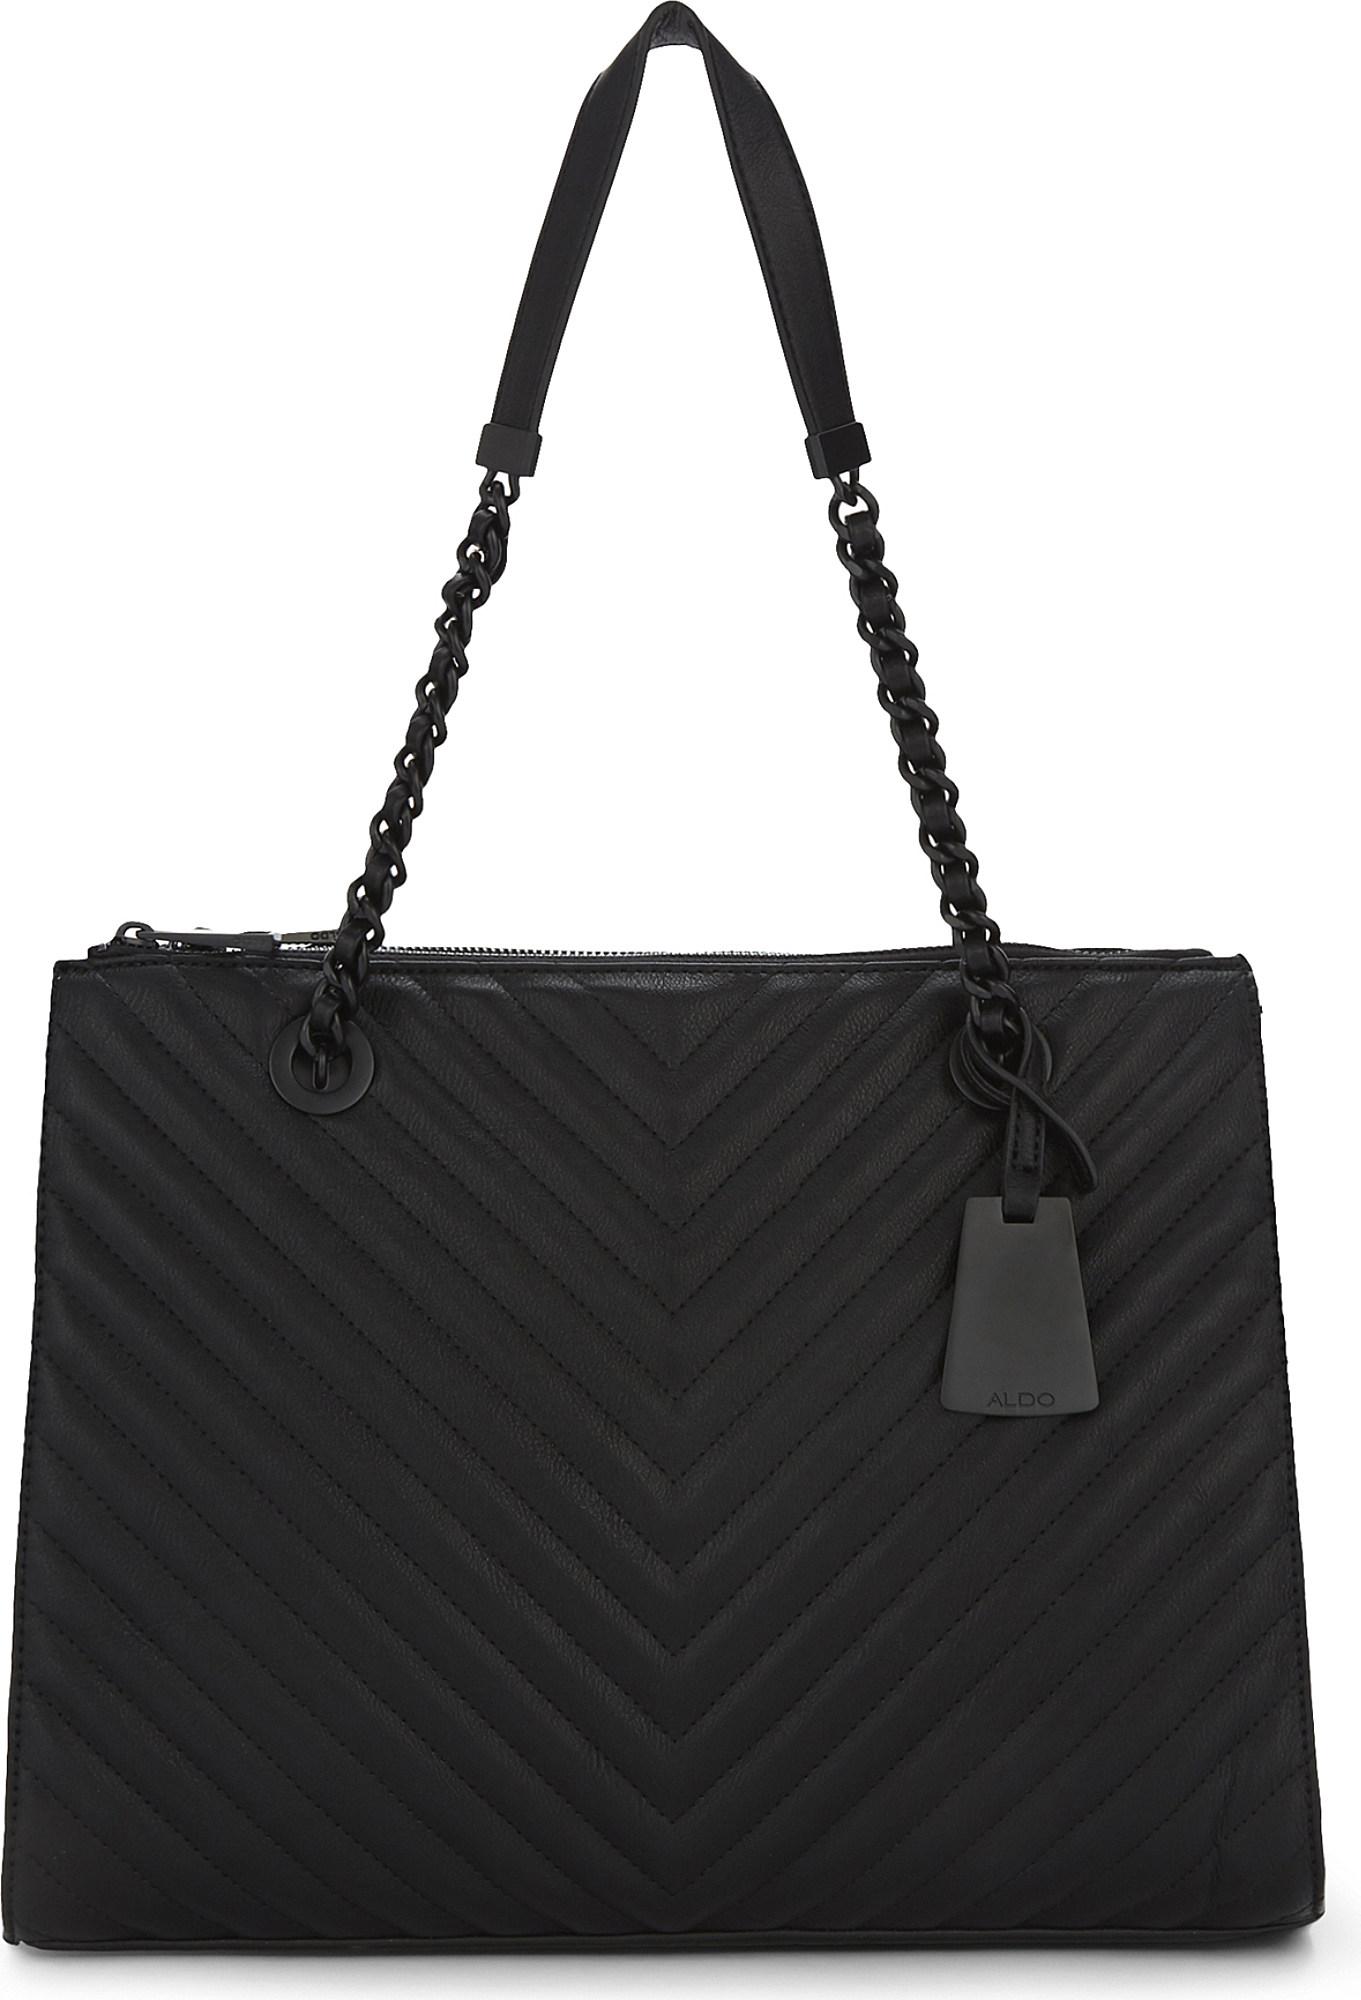 ALDO Katty Quilted Faux-leather Tote in Black Leather (Black) - Lyst